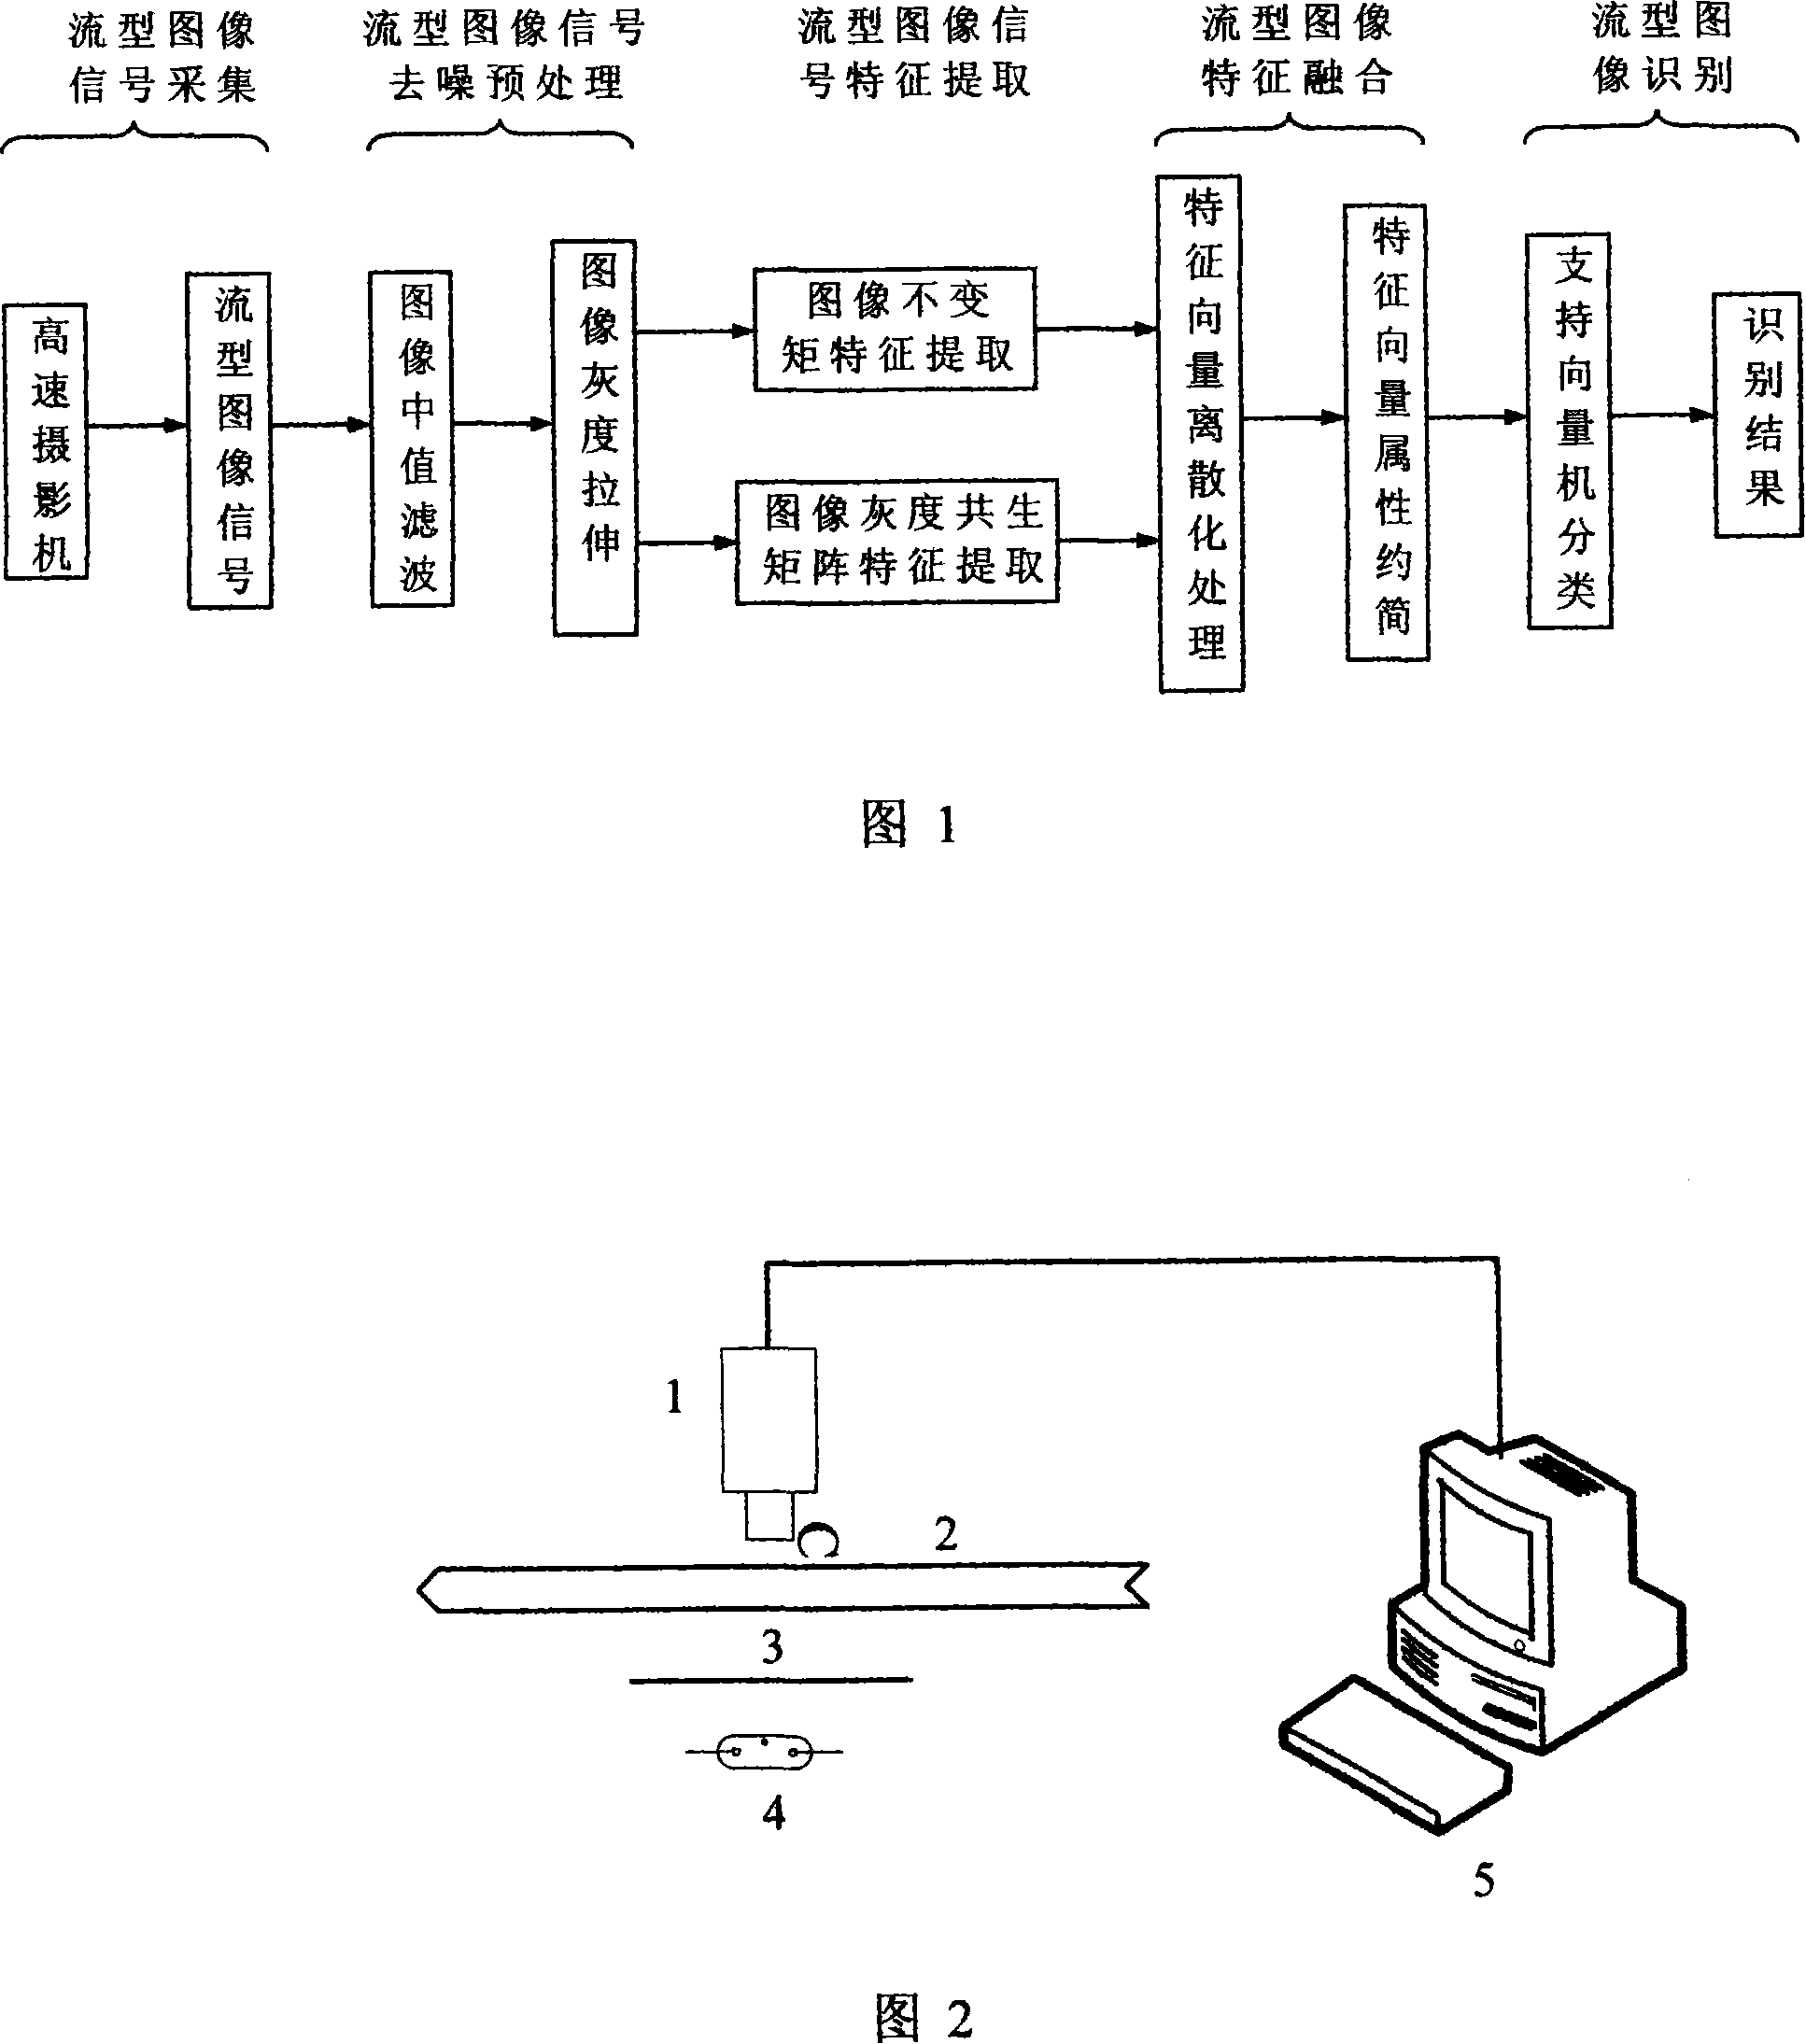 Gas-liquid two-phase flow type recognition method based on digital graphic processing technique